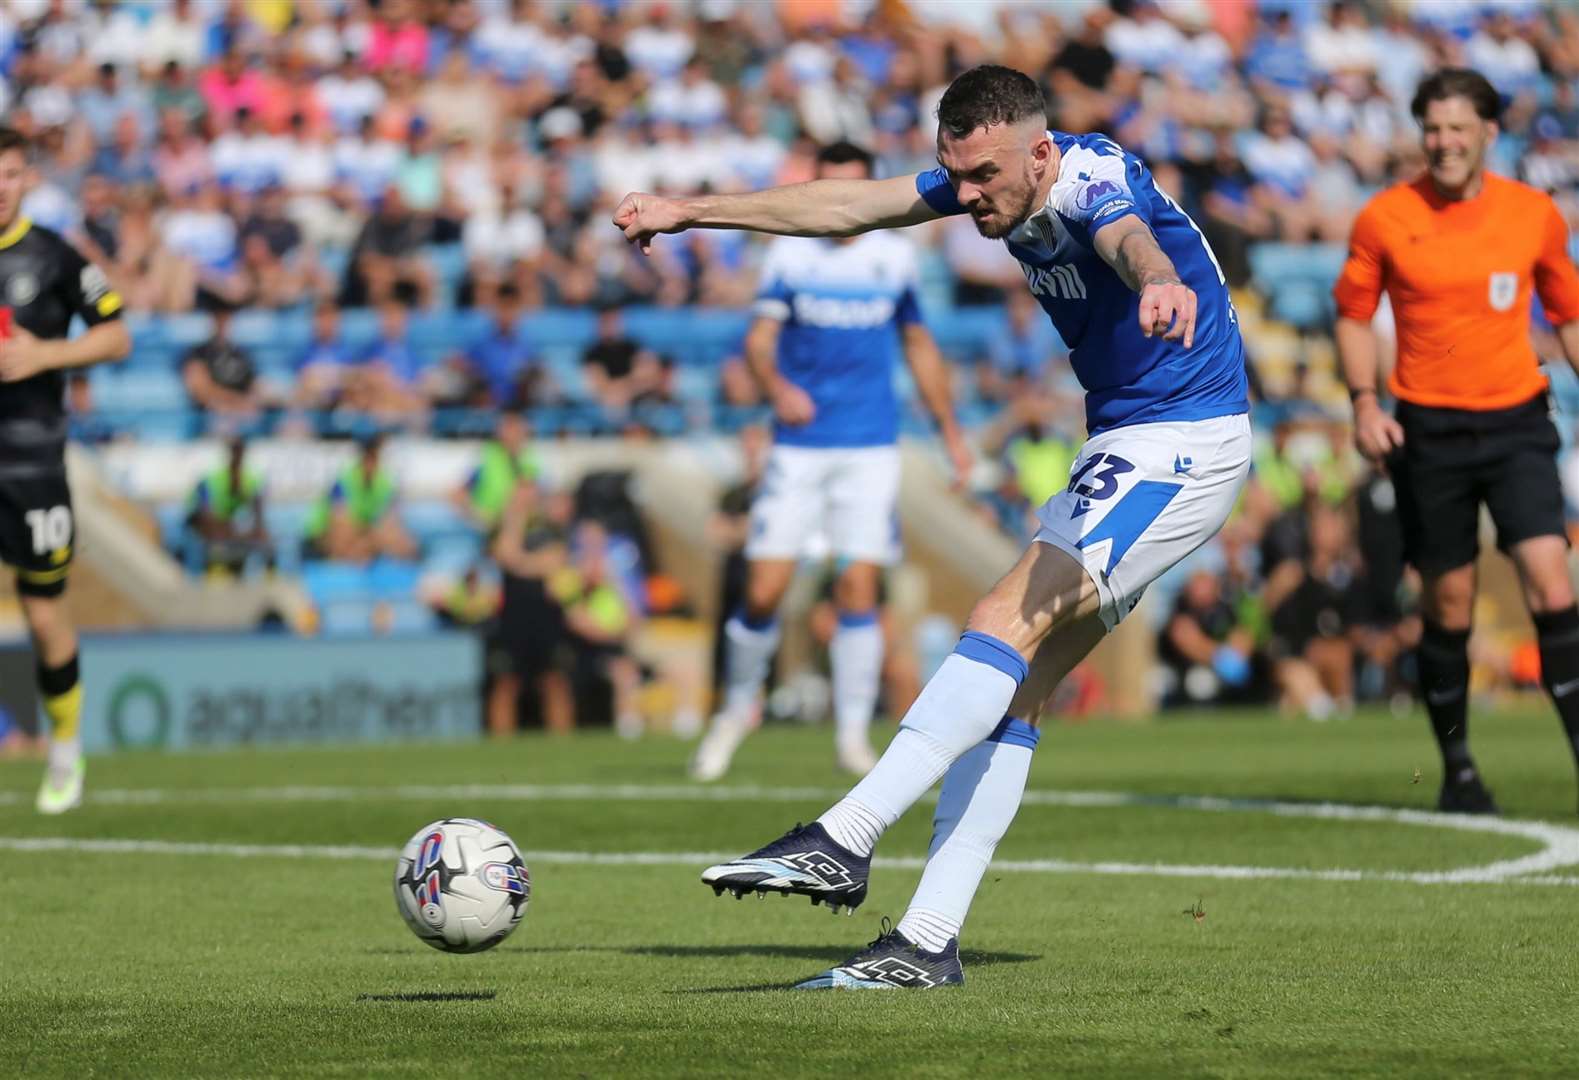 Scott Malone has a shot at goal for the Gills Picture: @Julian_KPI